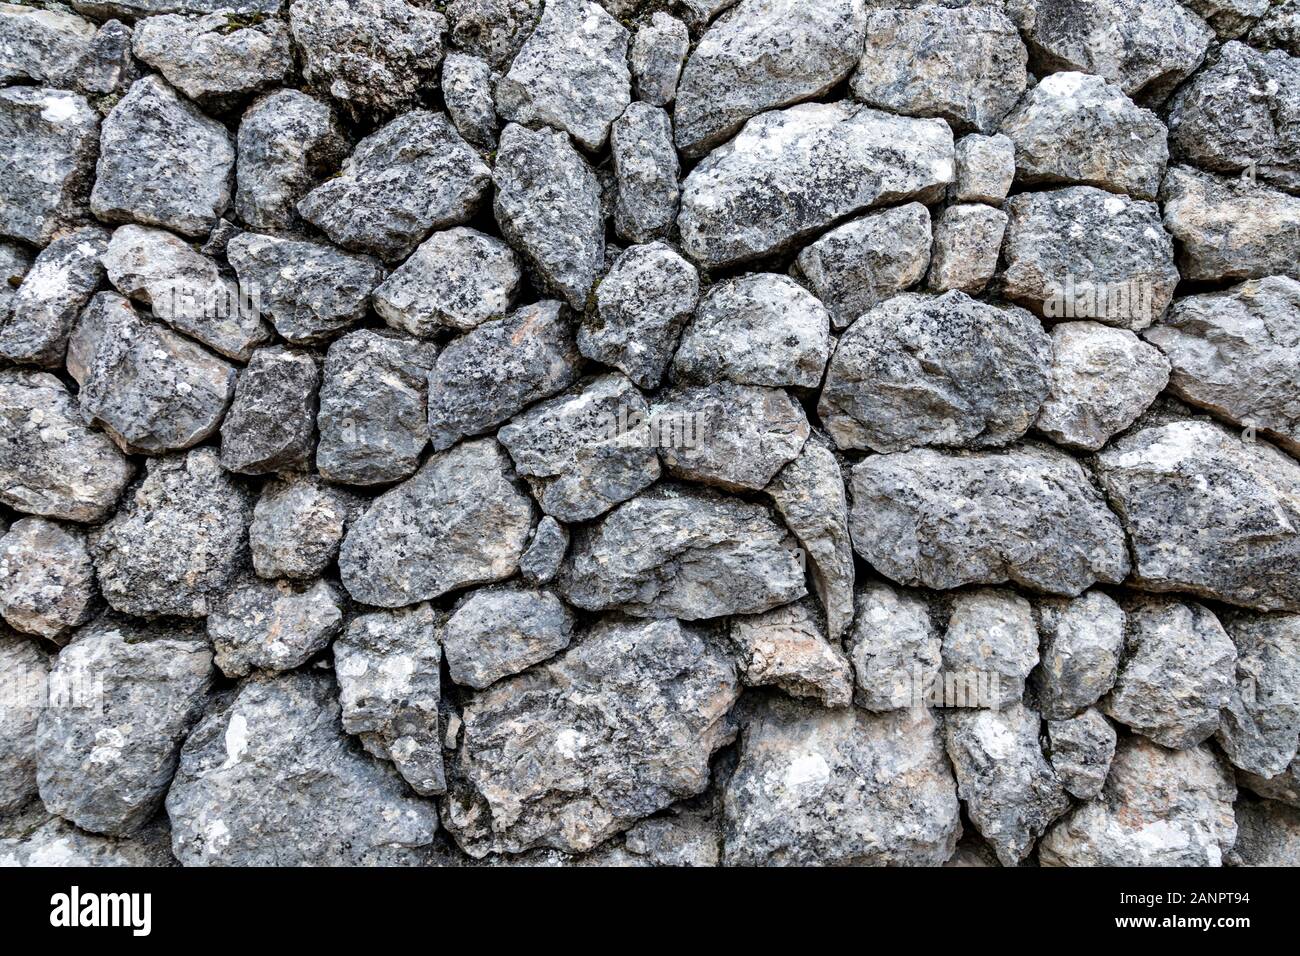 Mallorcan stone wall made of carefully stacked stones without using cement, Mallorca, Spain Stock Photo